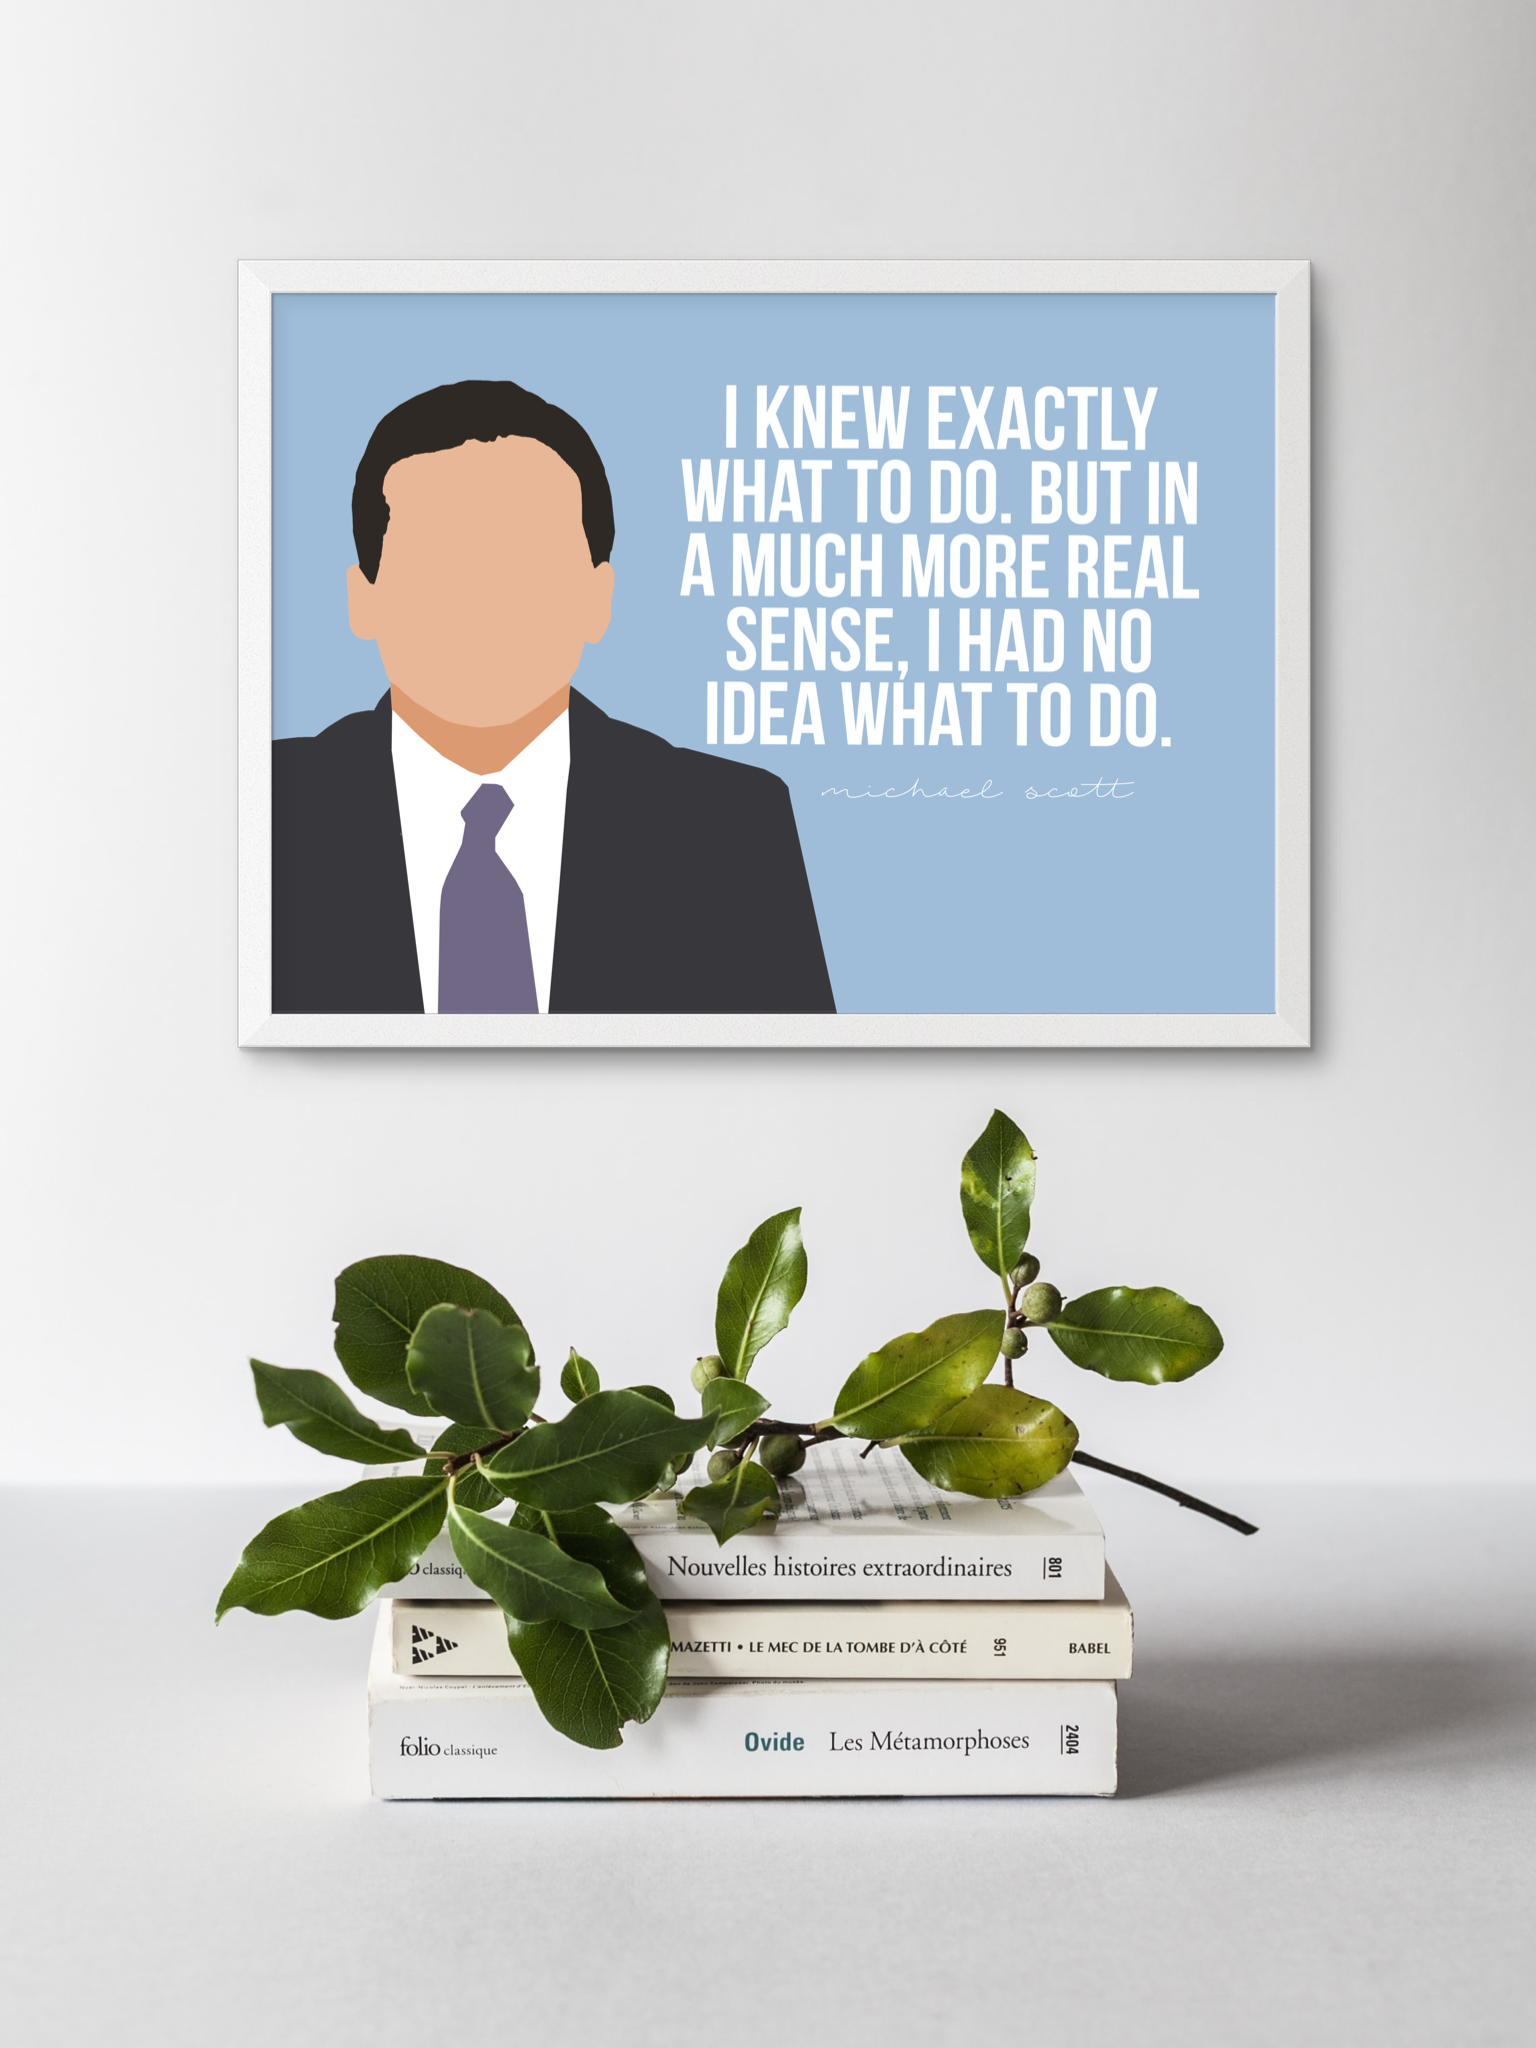 Minimal Portrait of Michael Scott from The Office. Quote reads, "I knew exactly what to do, but in a much more real sense, I had no idea what to do."